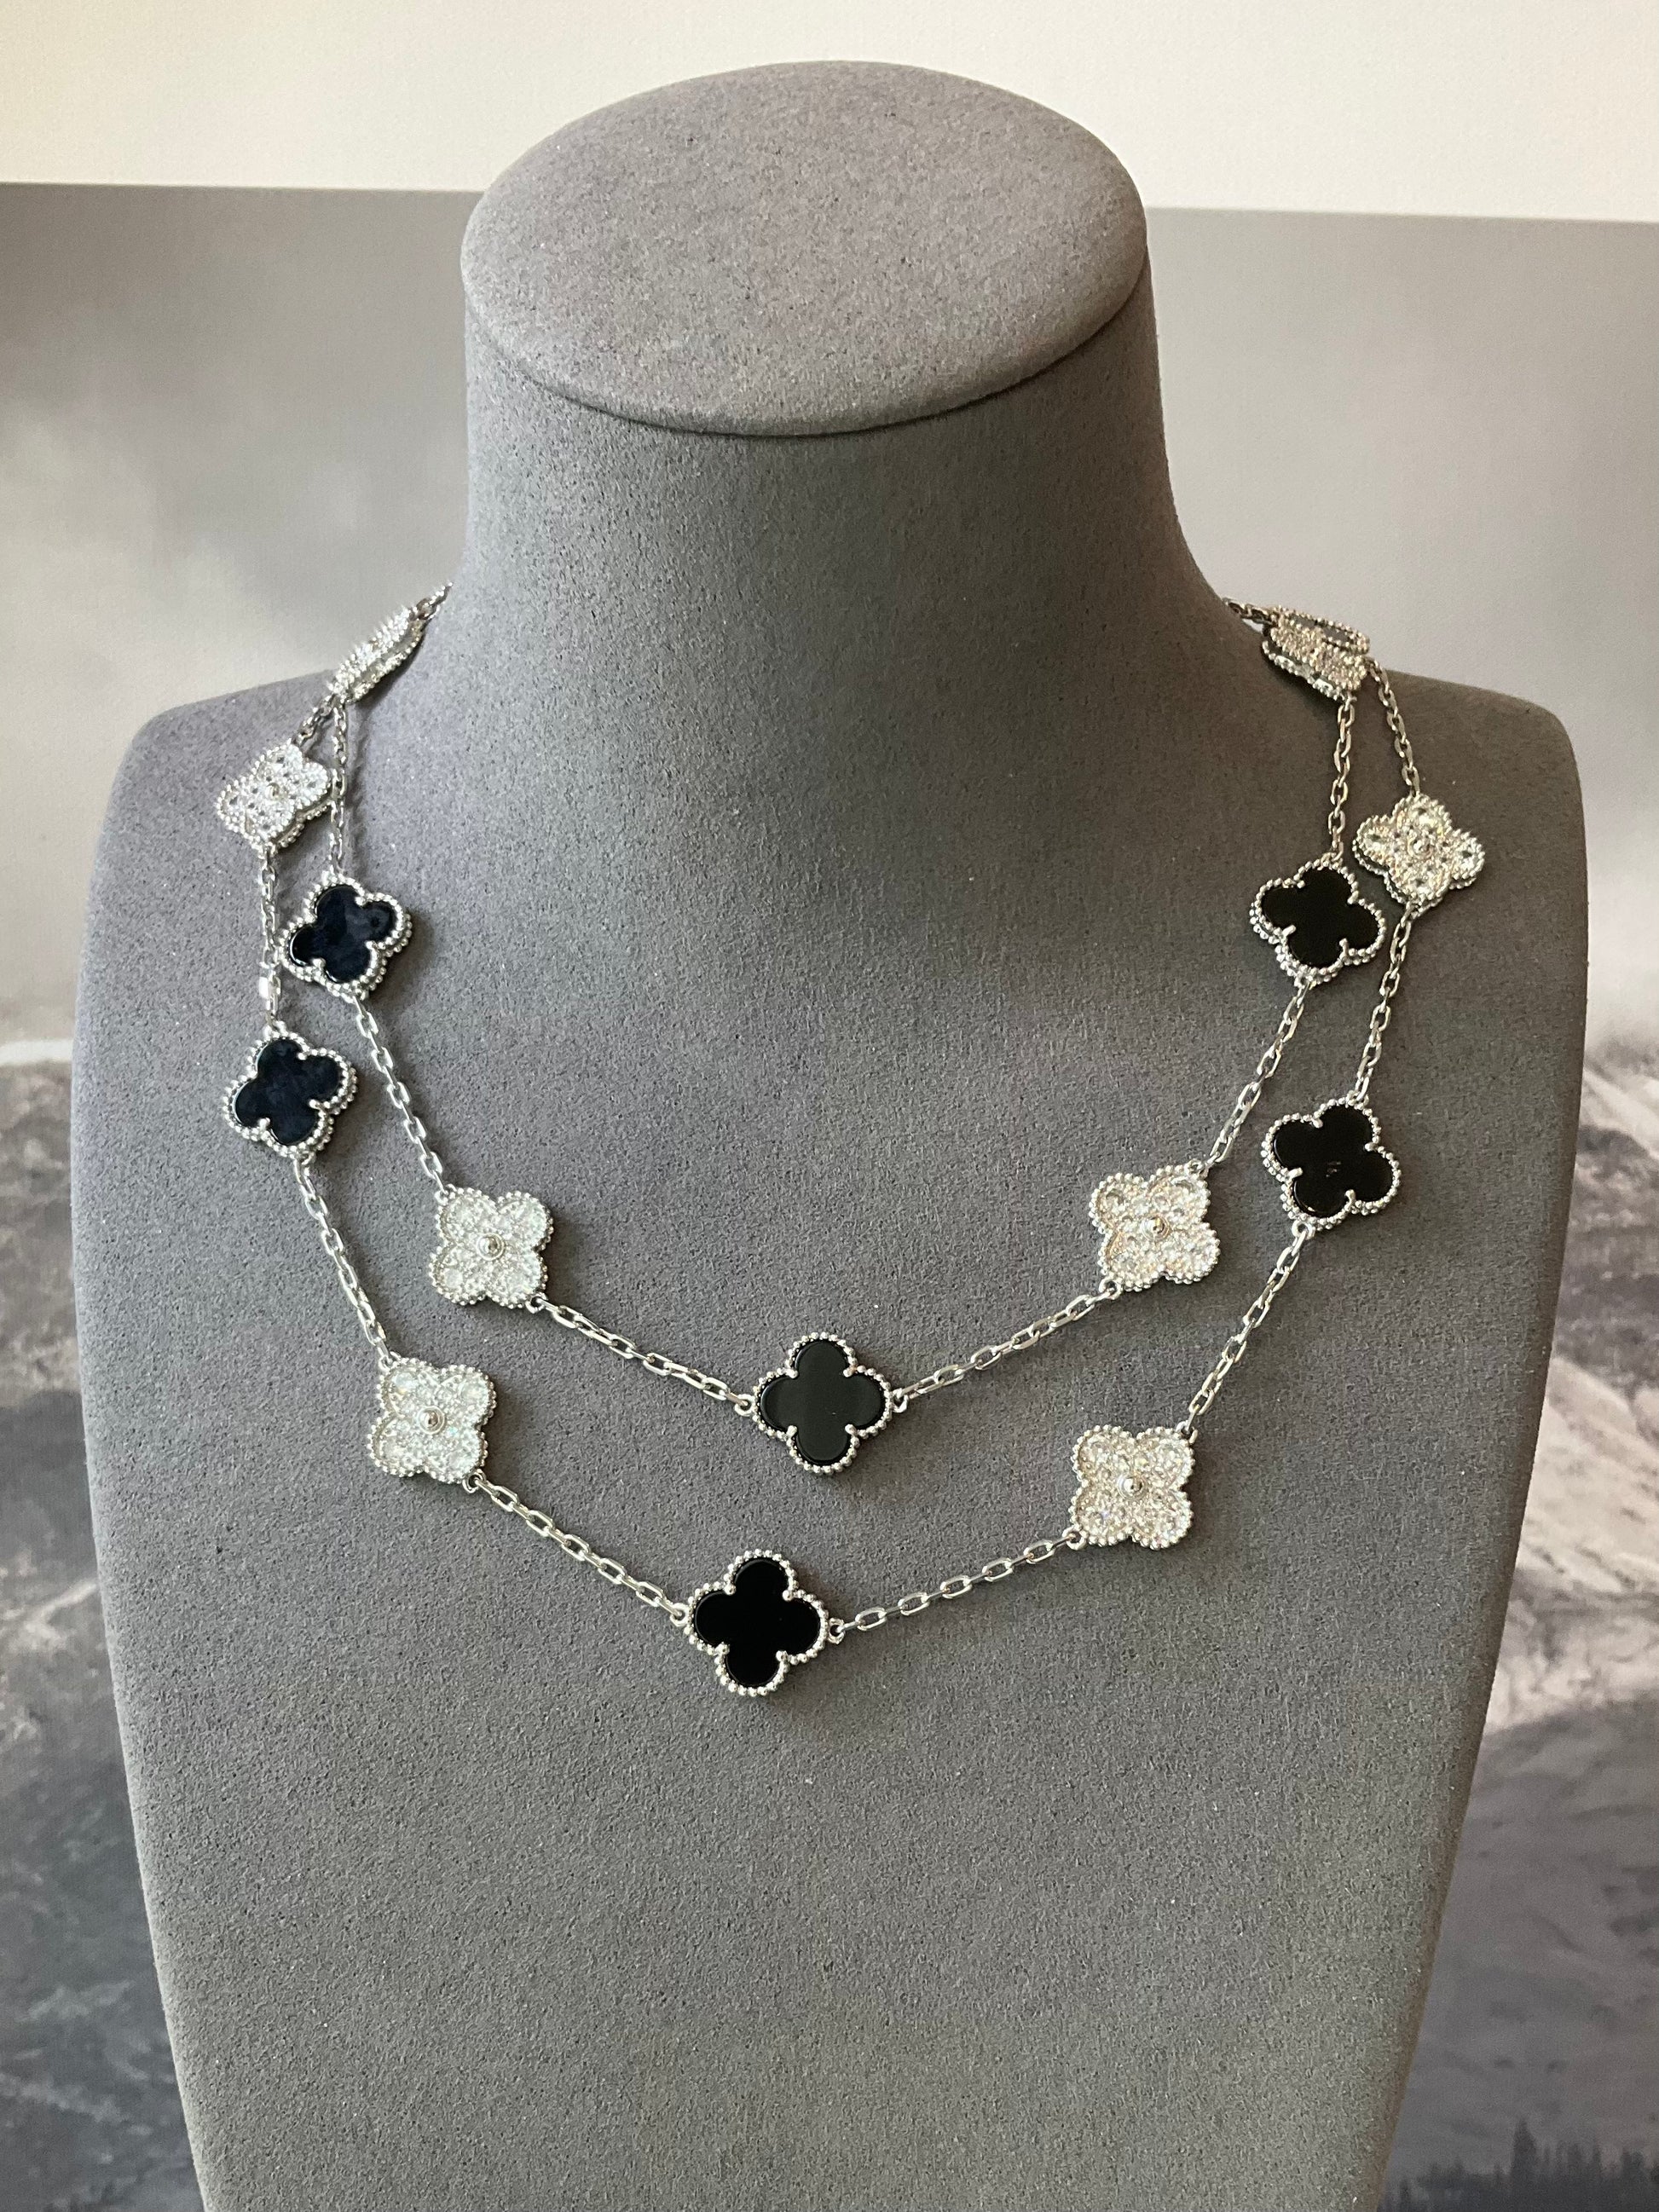 20 motifs onyx cz 15mm clover necklace 925 silver with 18k white gold plated 84cm - ParadiseKissCo